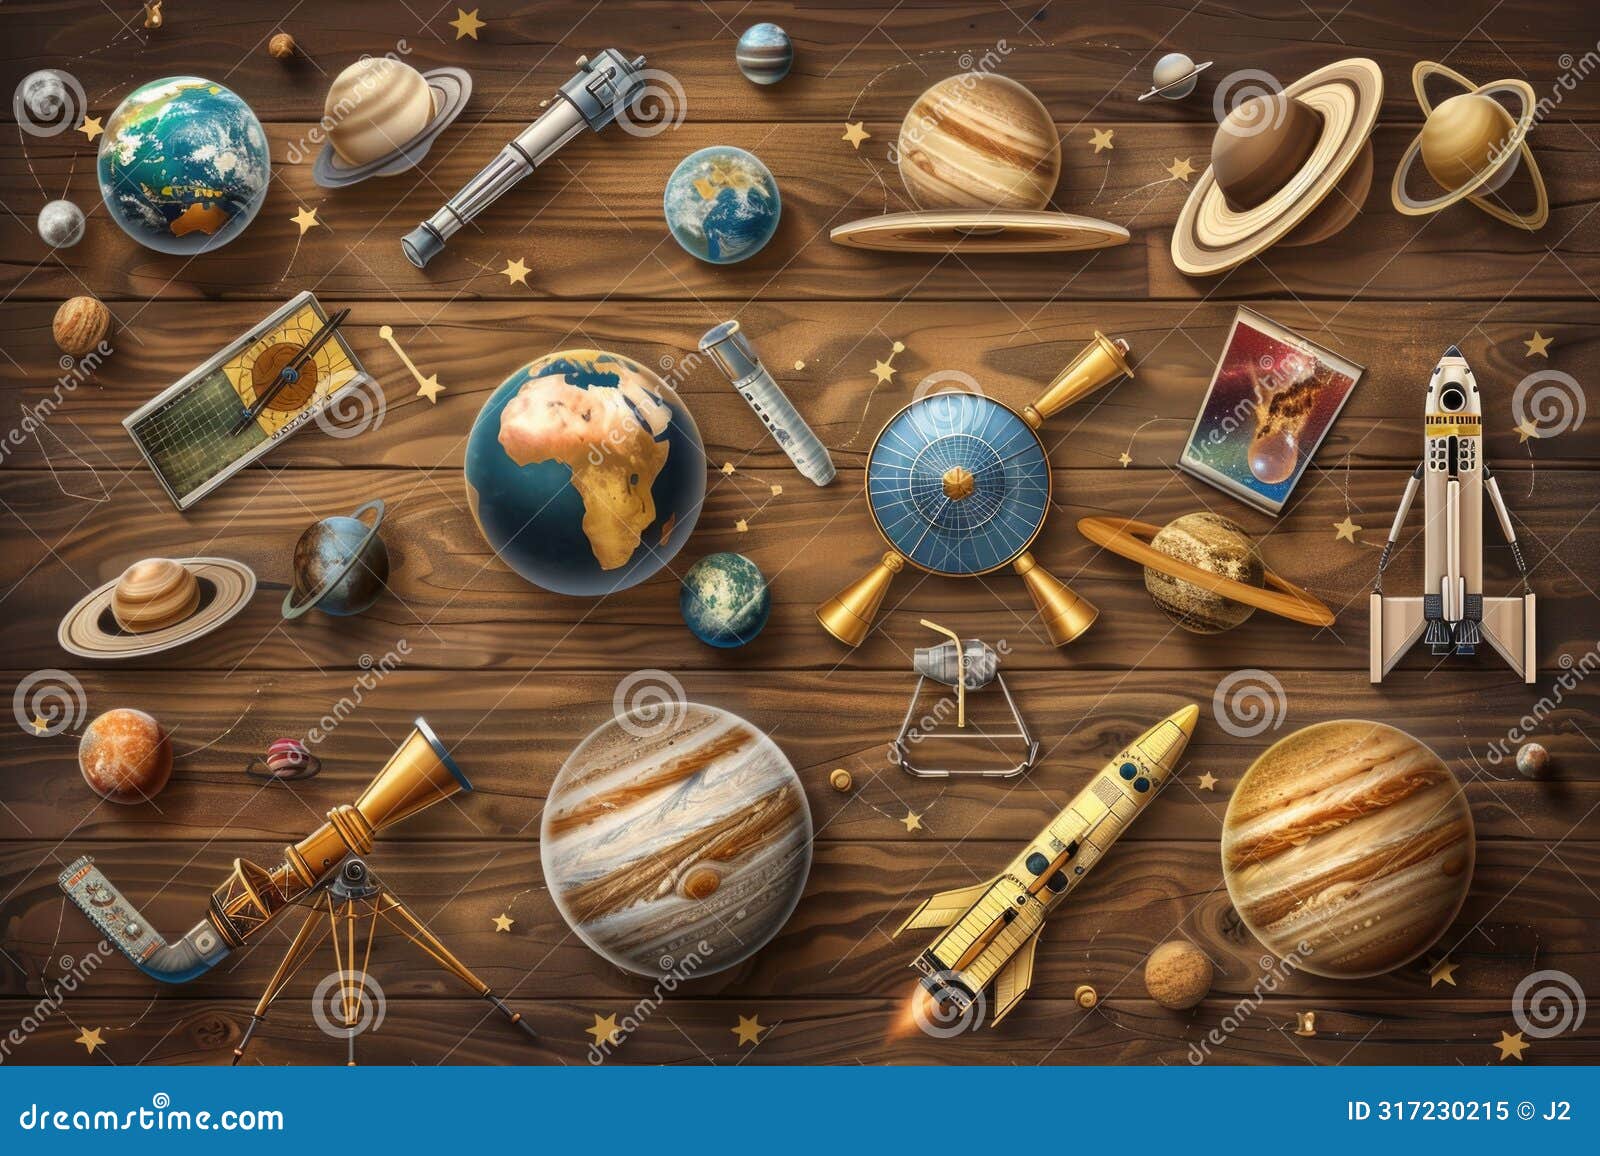 astronomy day celebration with telescopes, planets, and celestial phenomena on wooden background